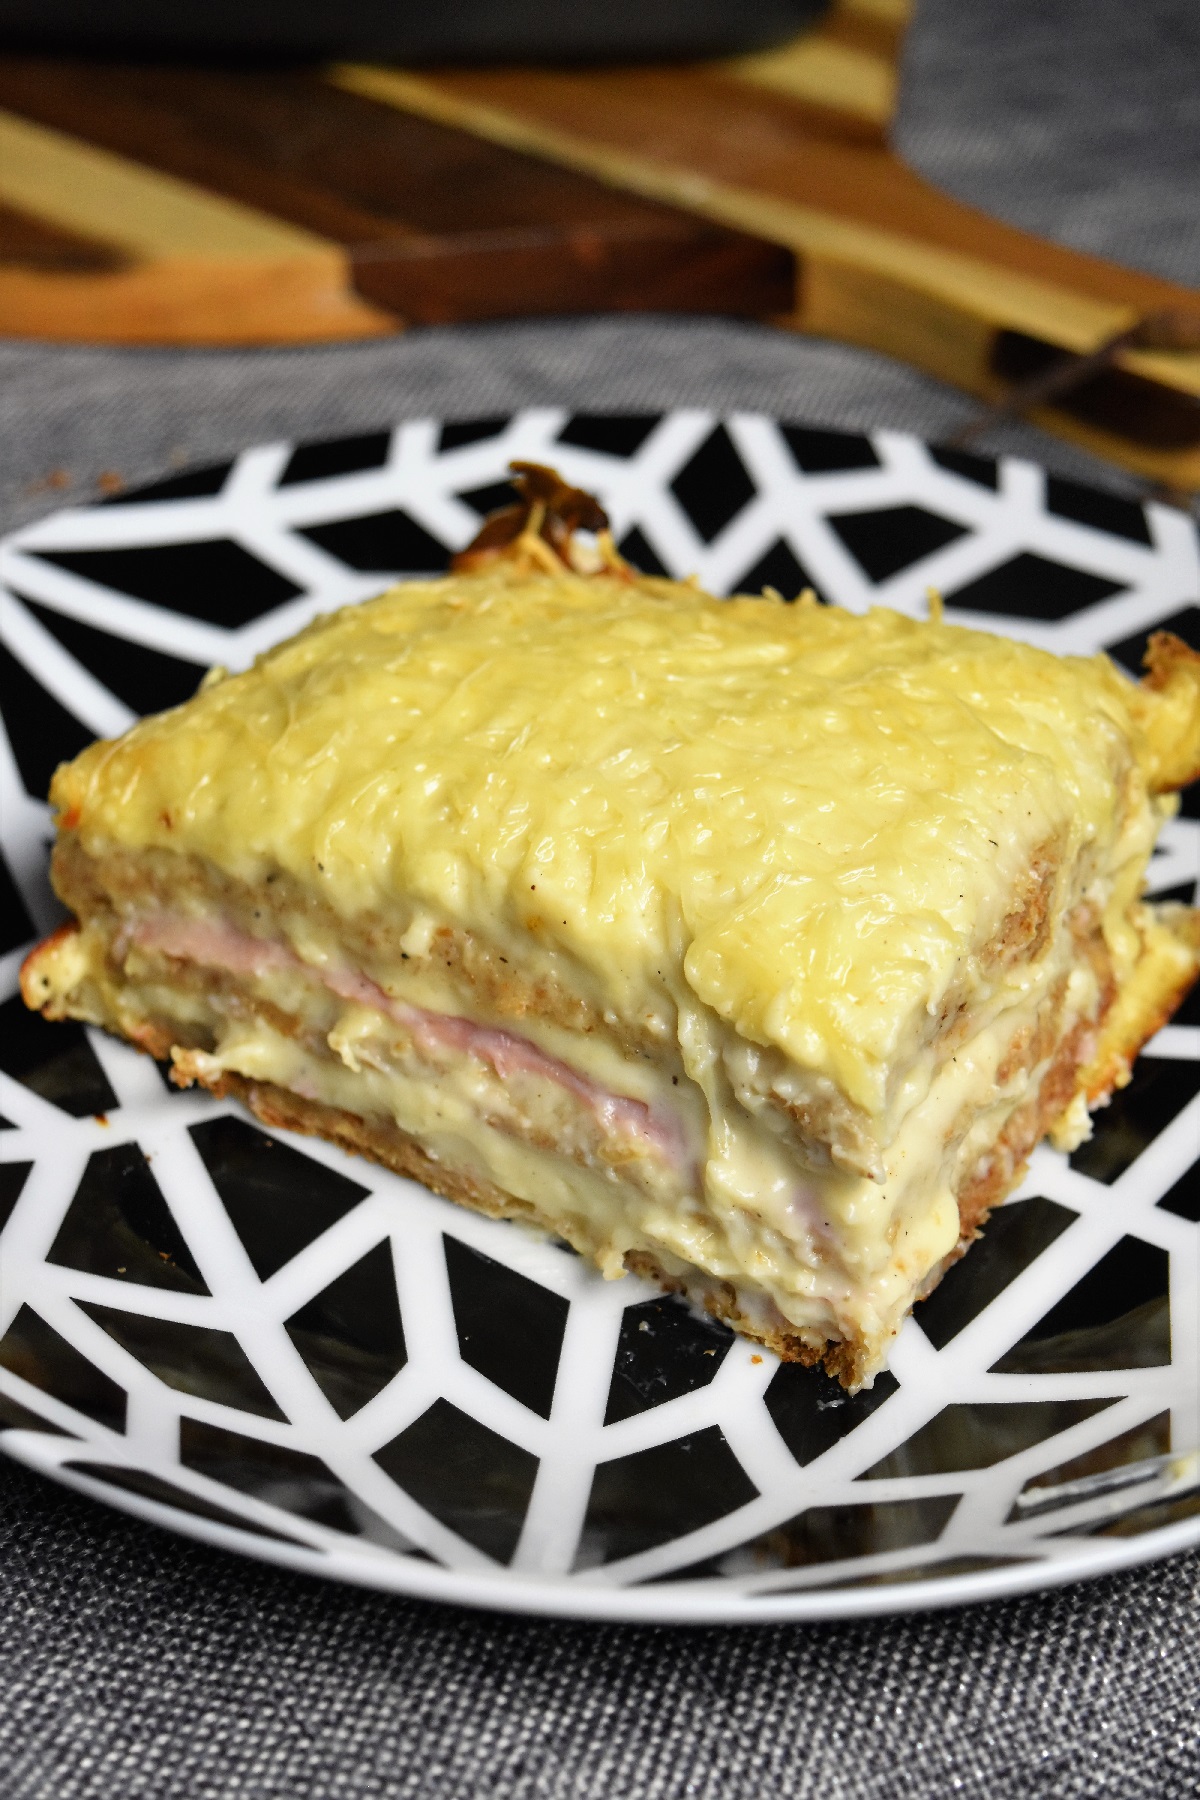 Croque cake jambon, fromage, sauce mornay